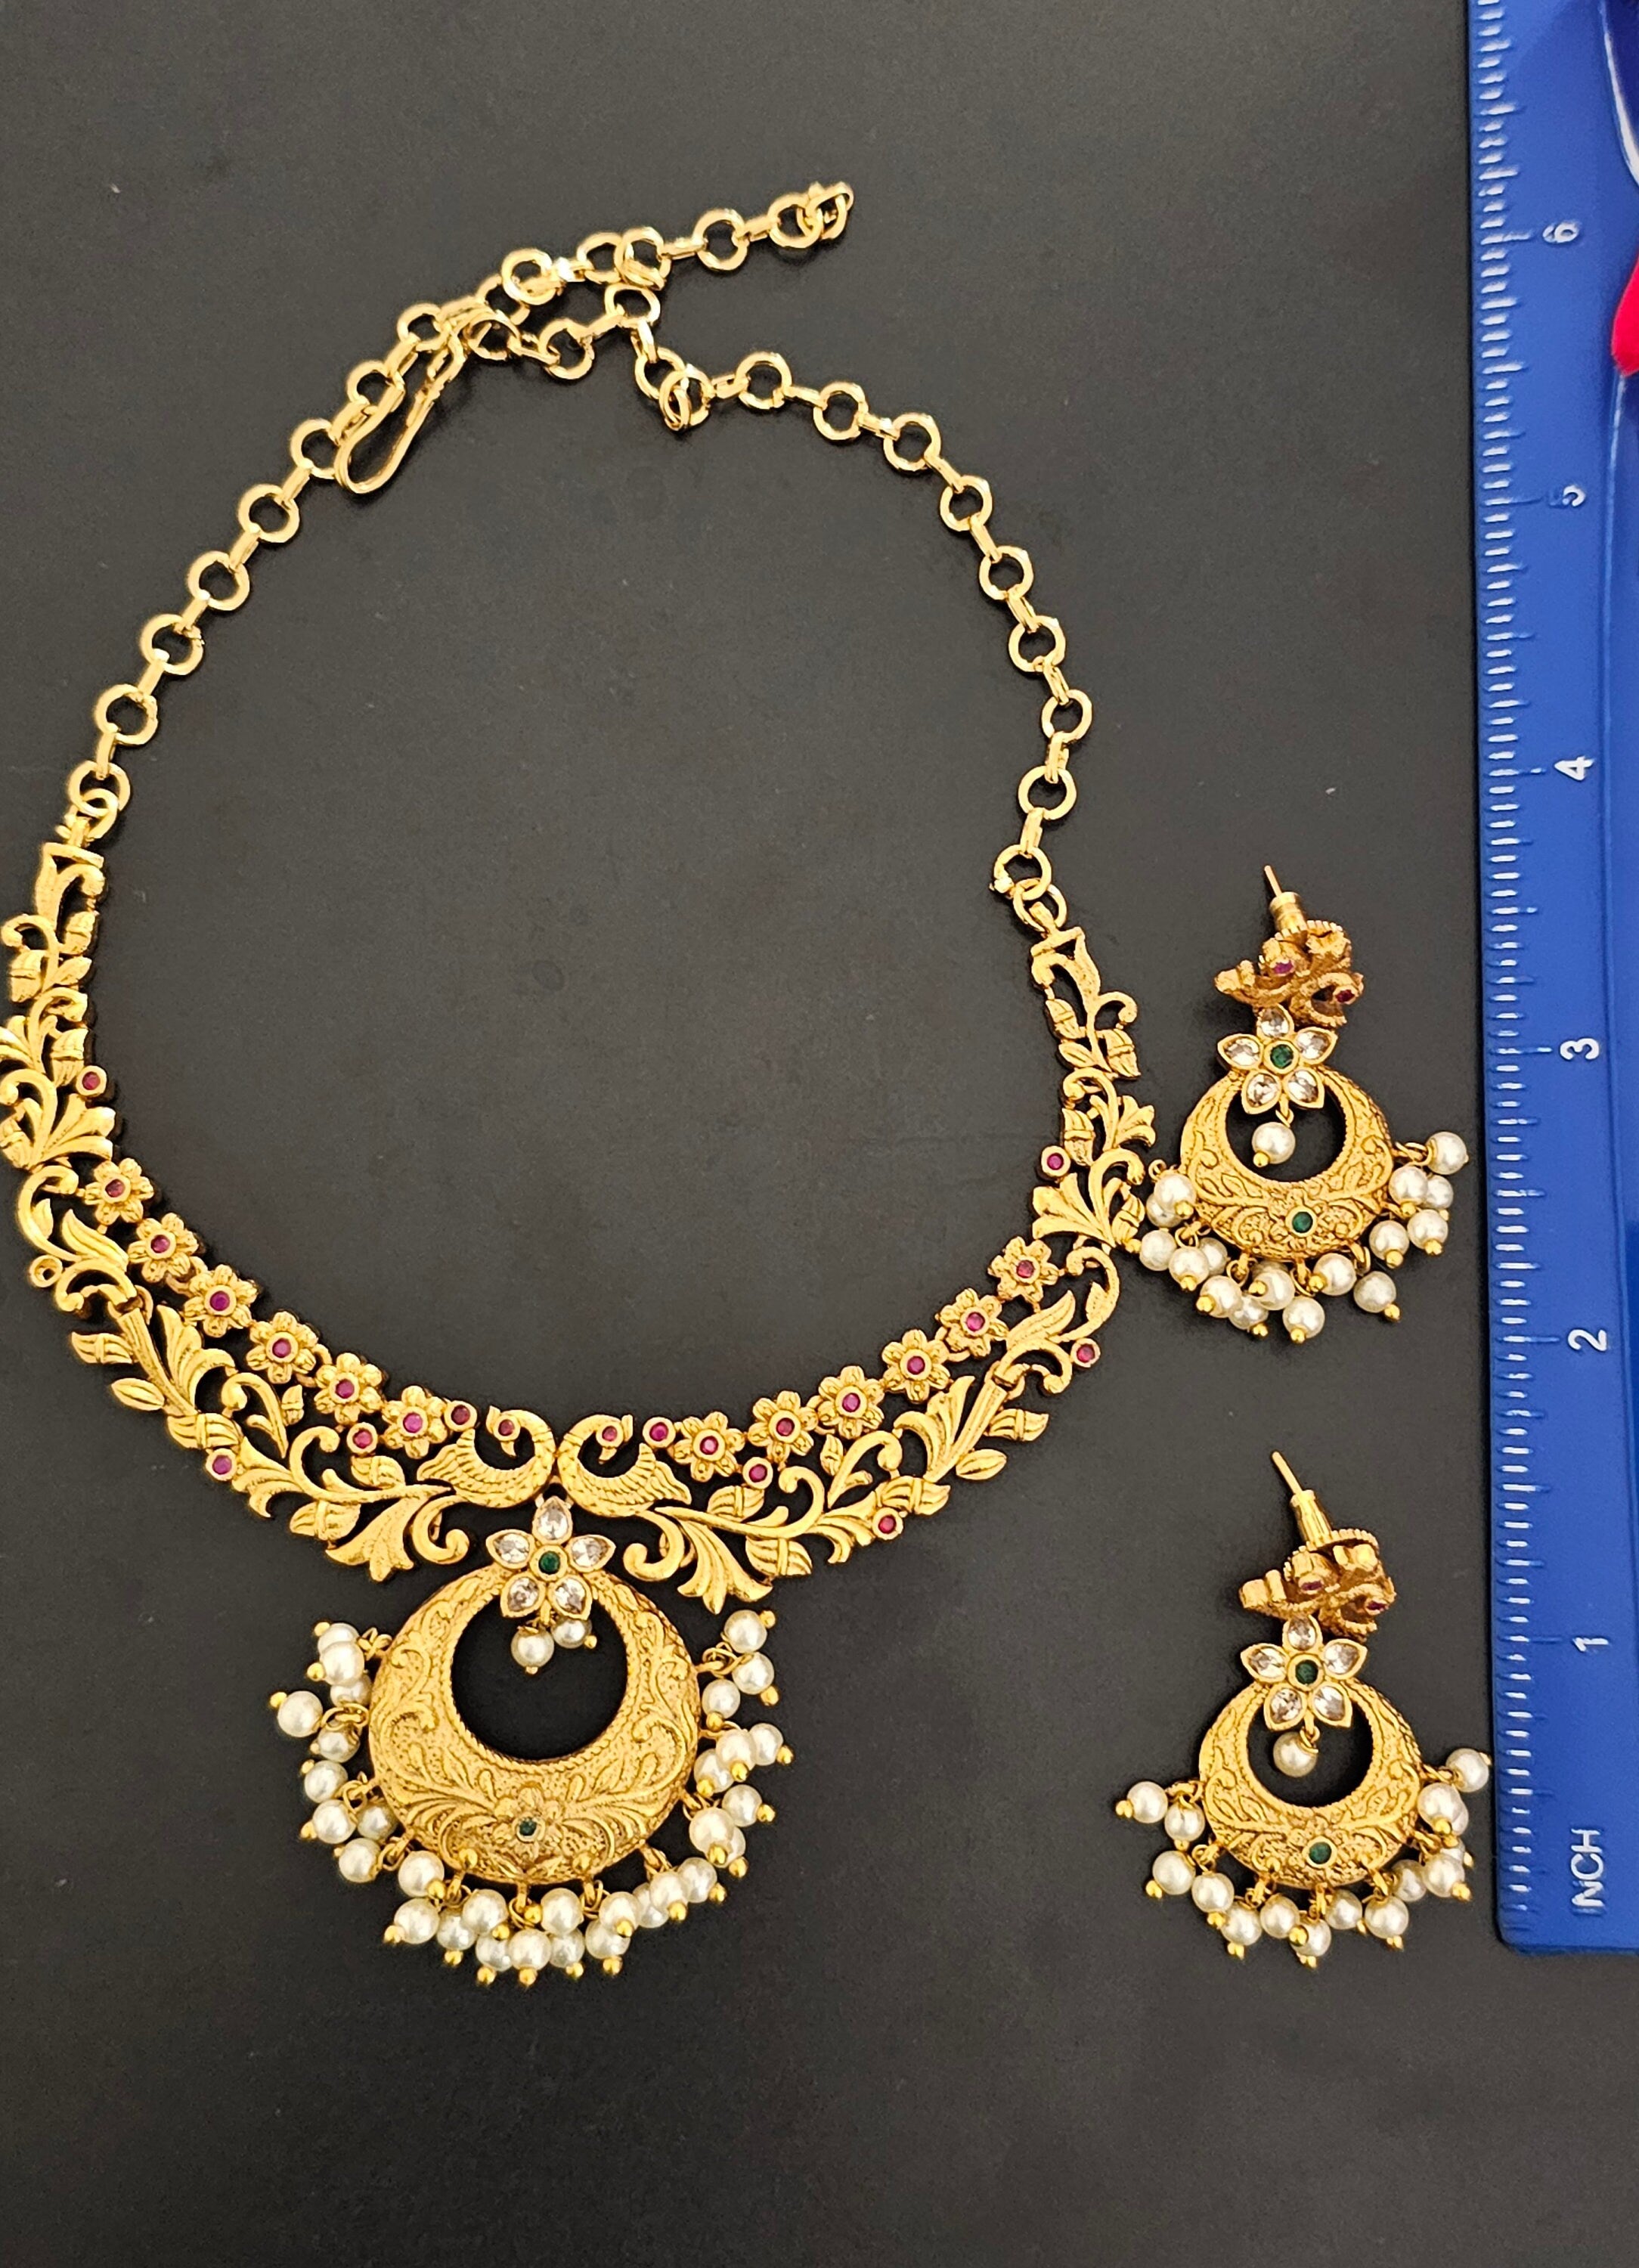 Peacock Premium Quality Chandbali Matte finish Necklace with matching Earrings